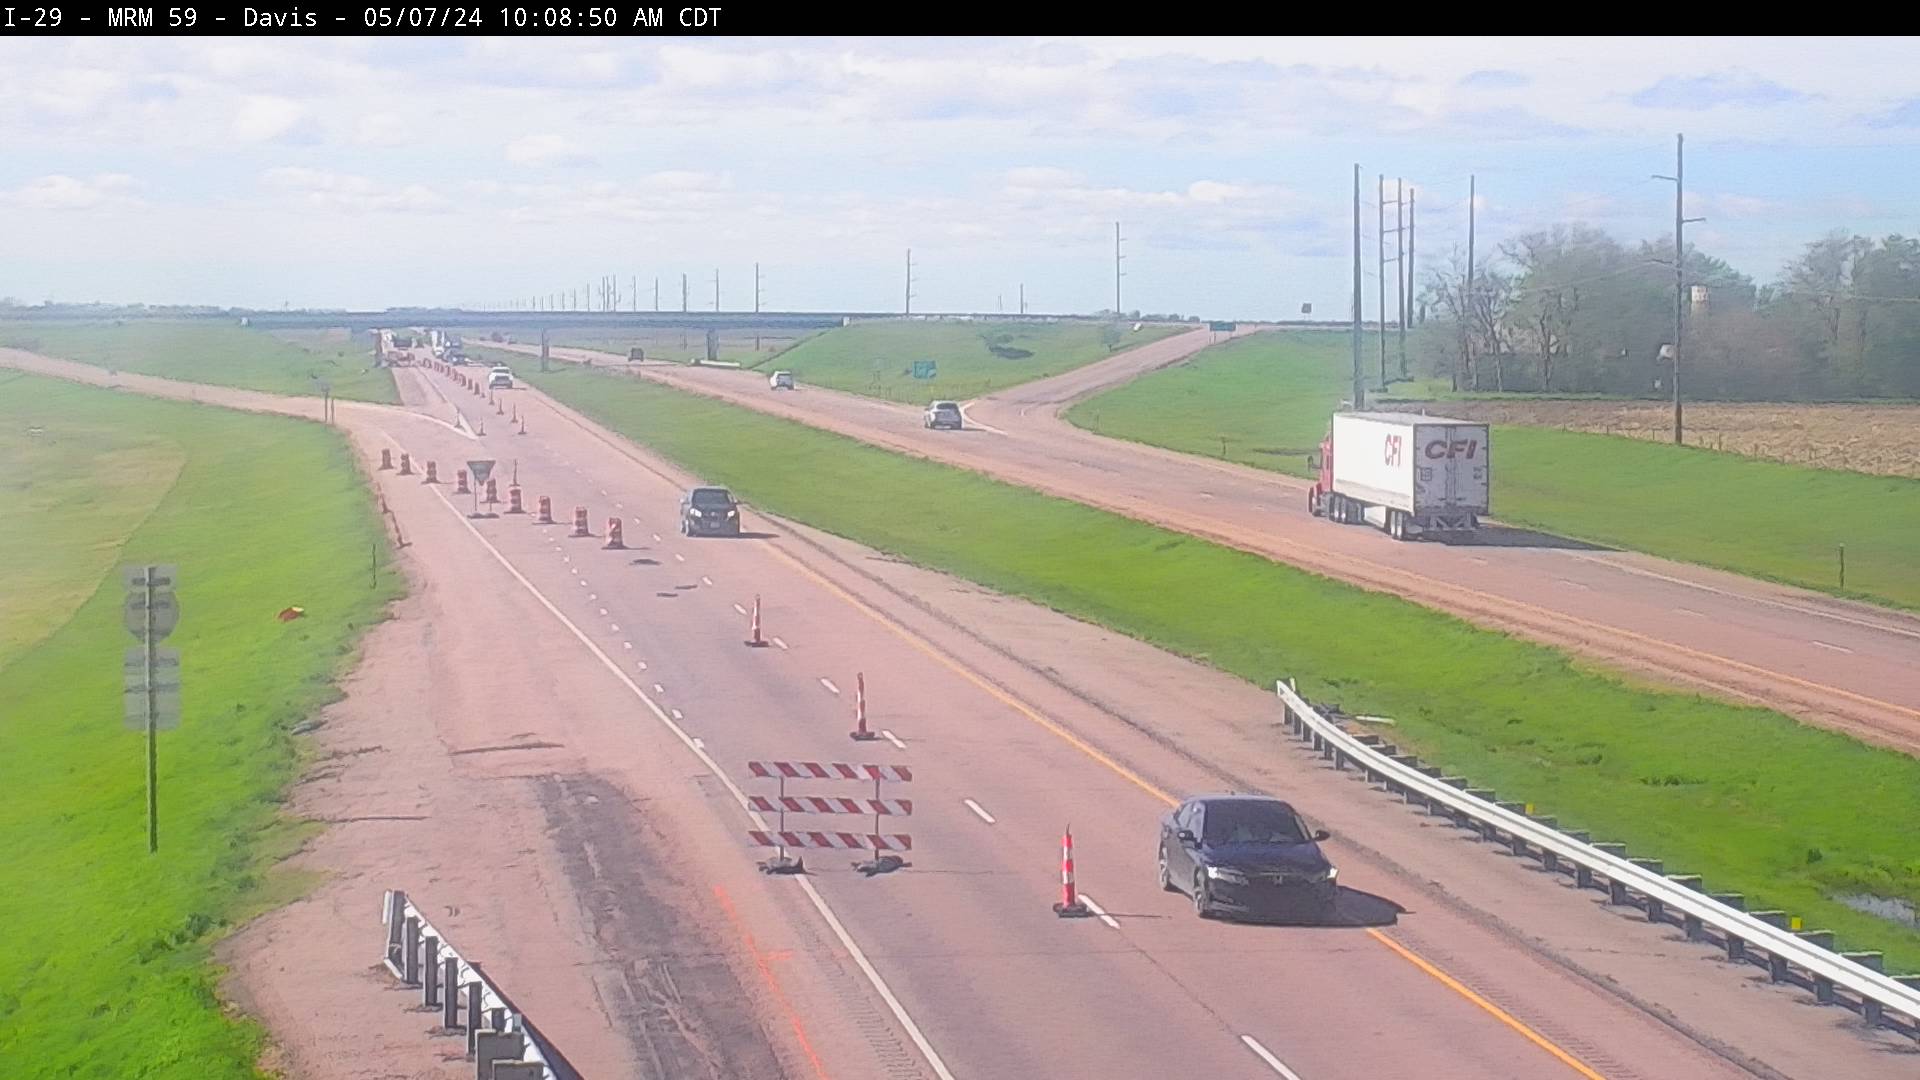 Traffic Cam 10 miles east of town along I-29 @ MM 59 - South Player